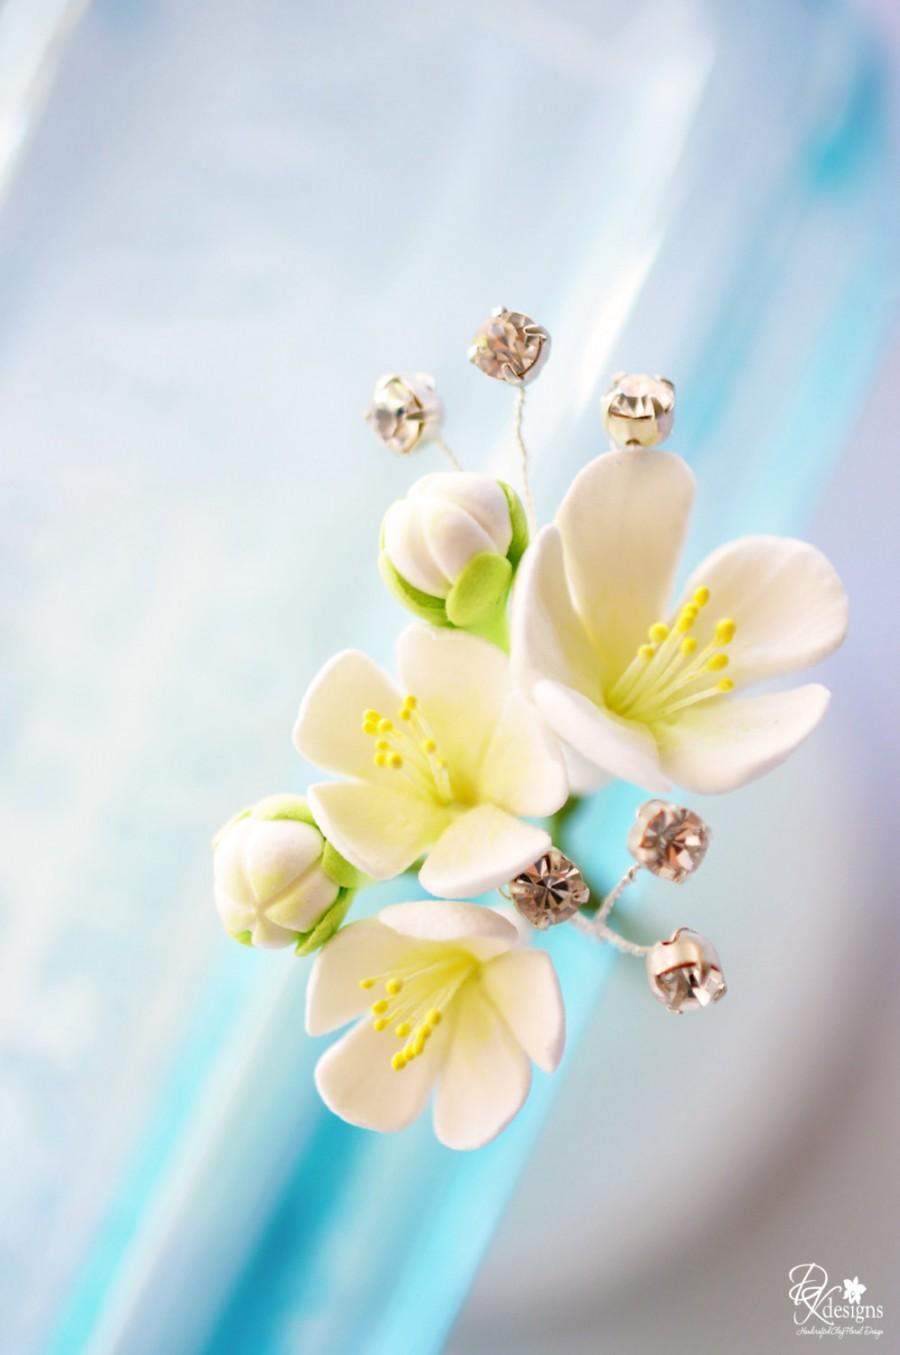 Wedding - Made to Order - White Cherry Blossom Hair Pin with Handwired Rhinestones with Silver Settings